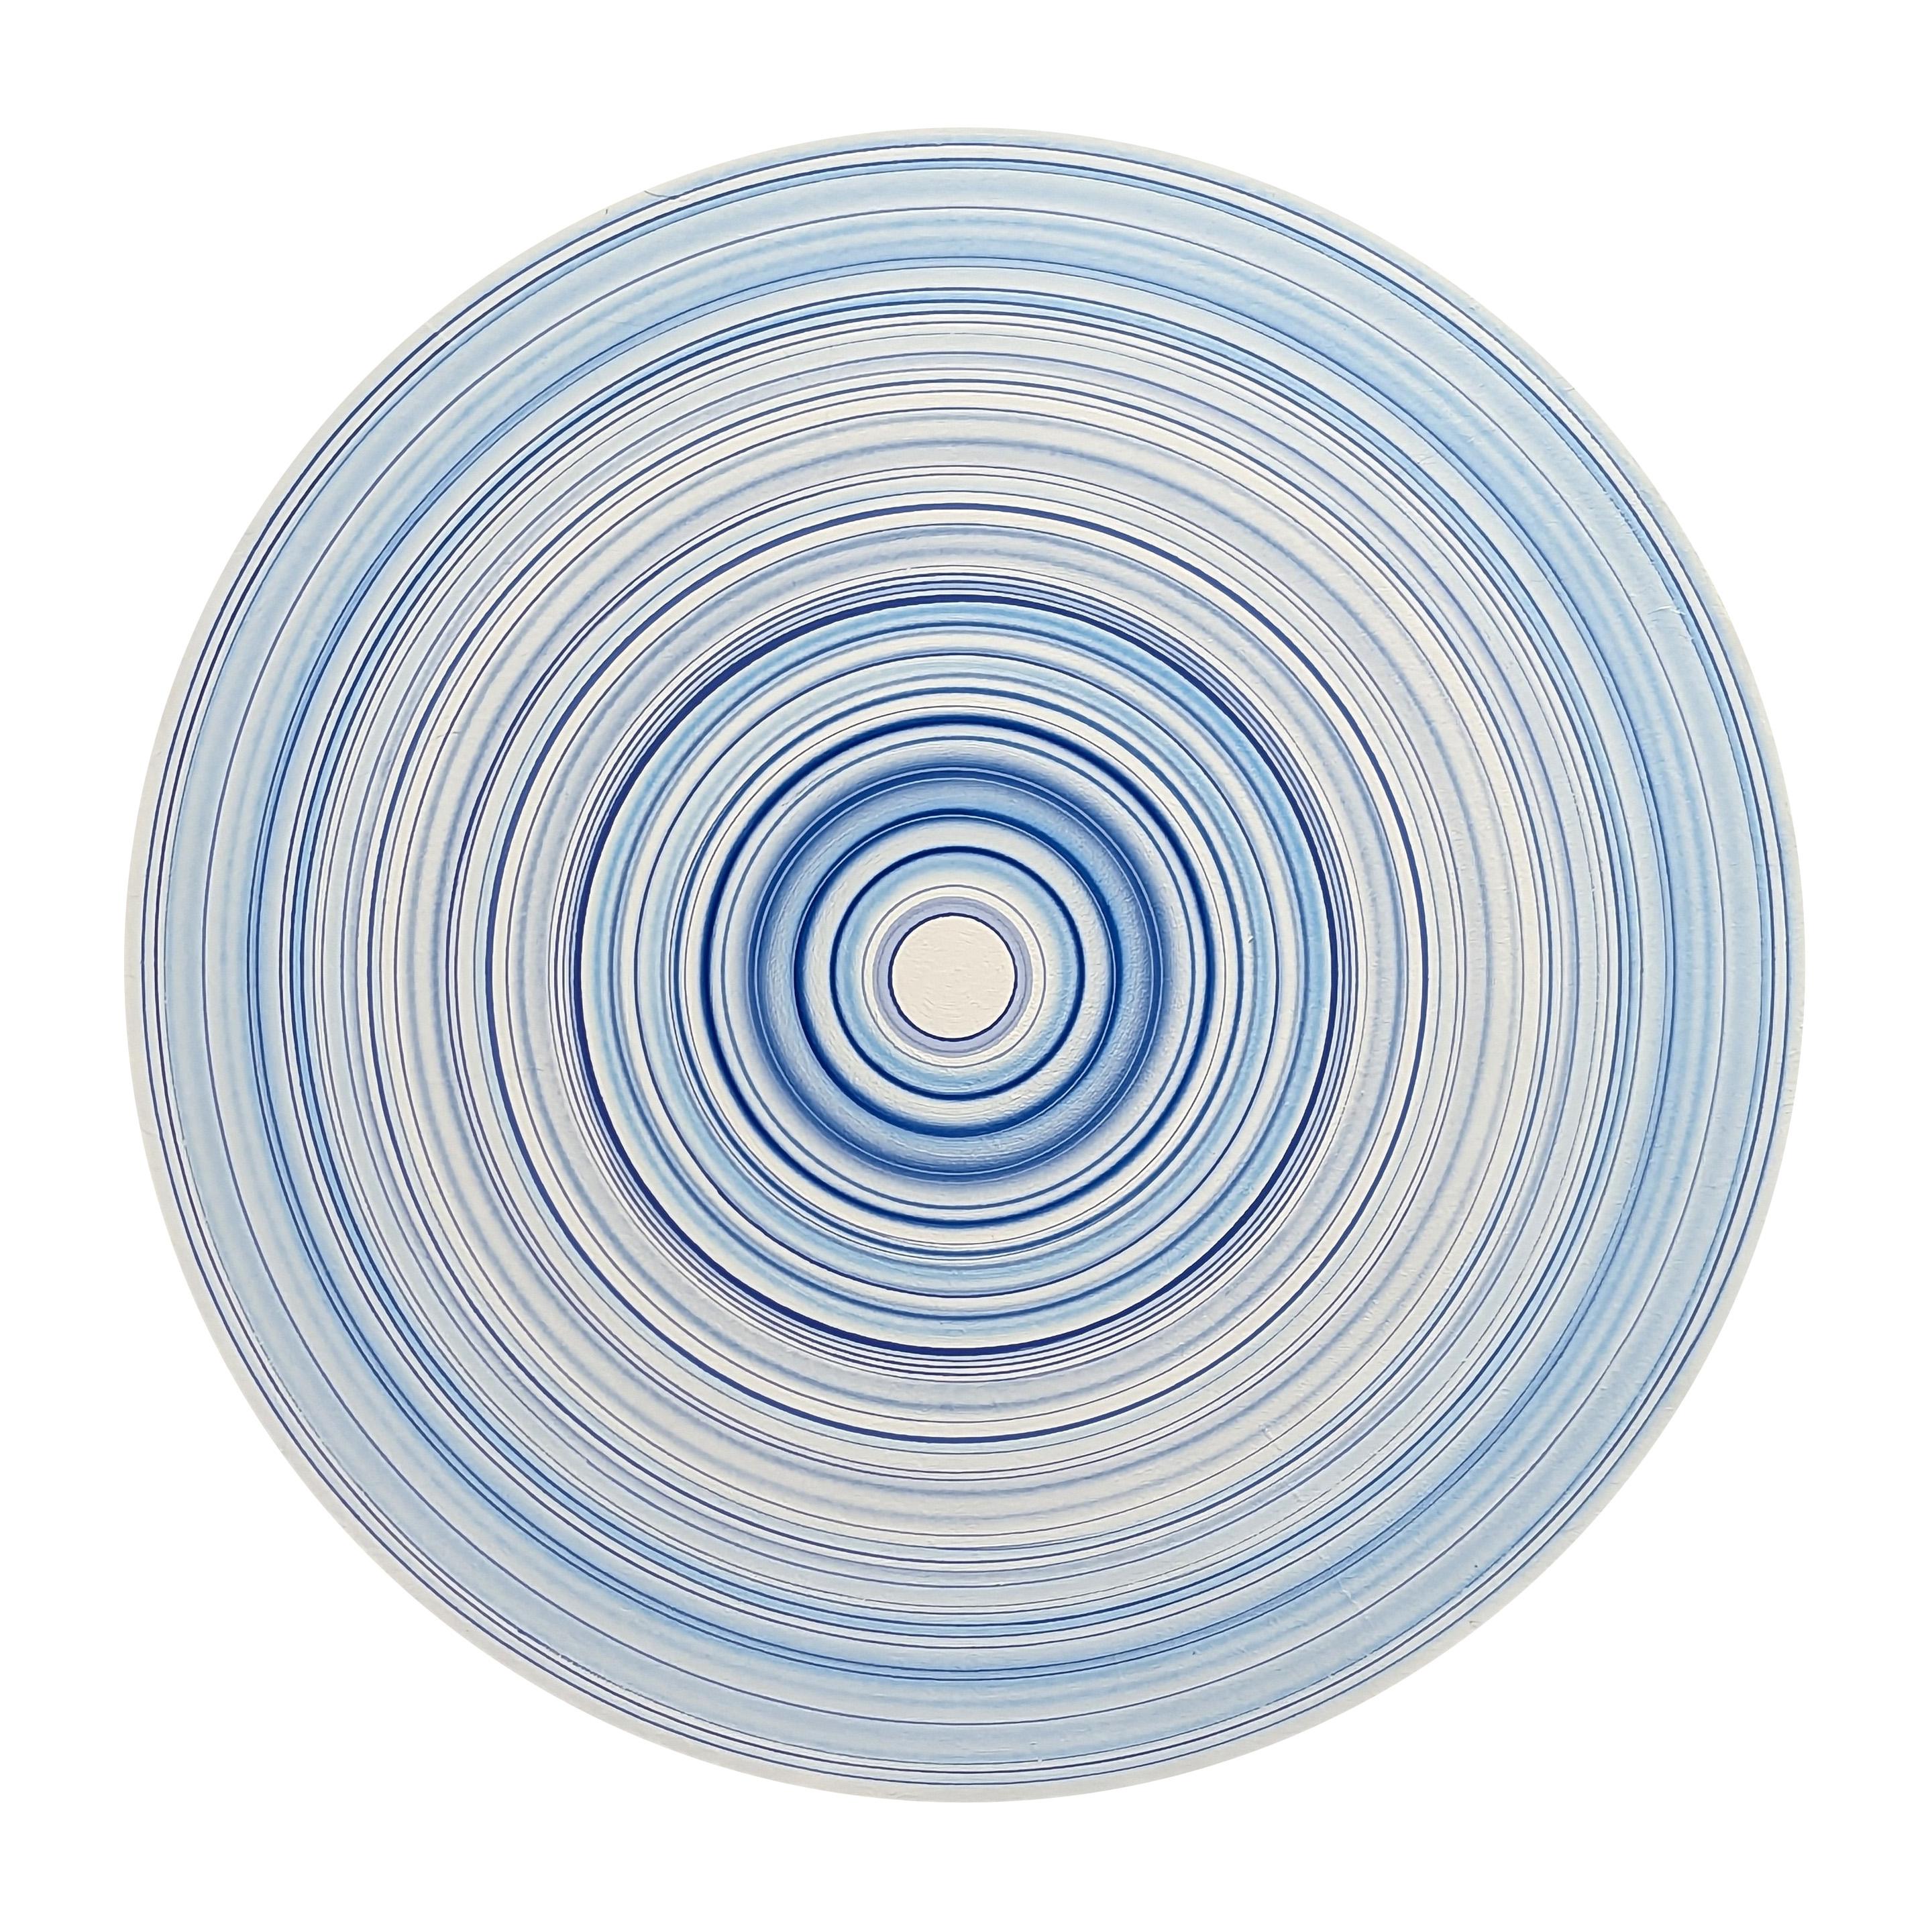 David Hardaker Abstract Painting - "Crazy Water" Contemporary Abstract Blue & White Concentric Circle Painting